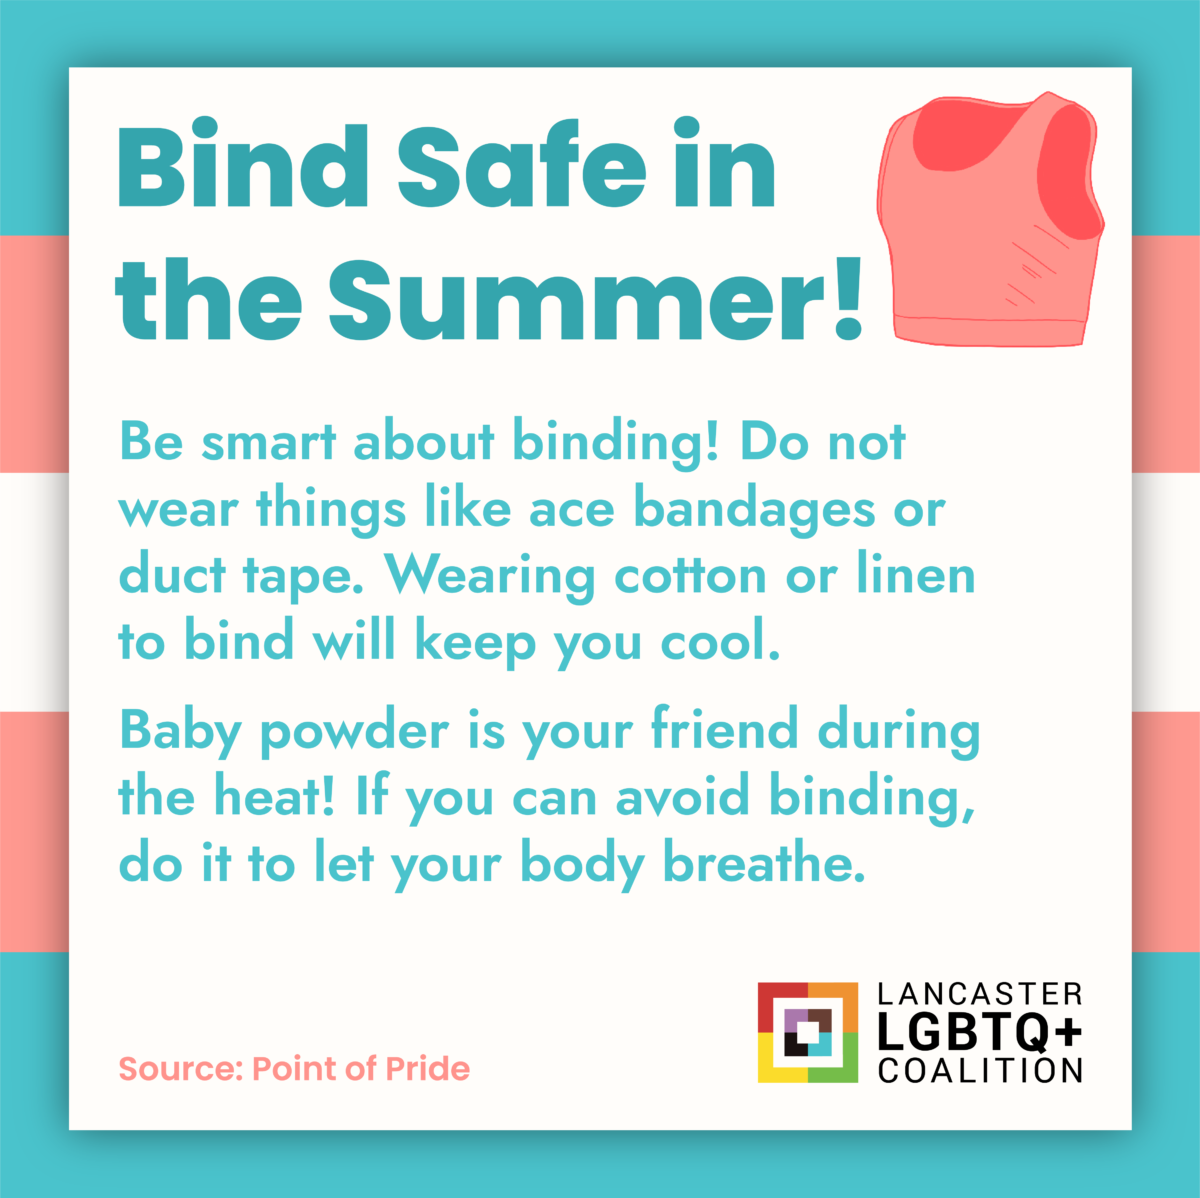 public service announcement on summer-safe binding designed by Frankie Reed '23, Graphic Design